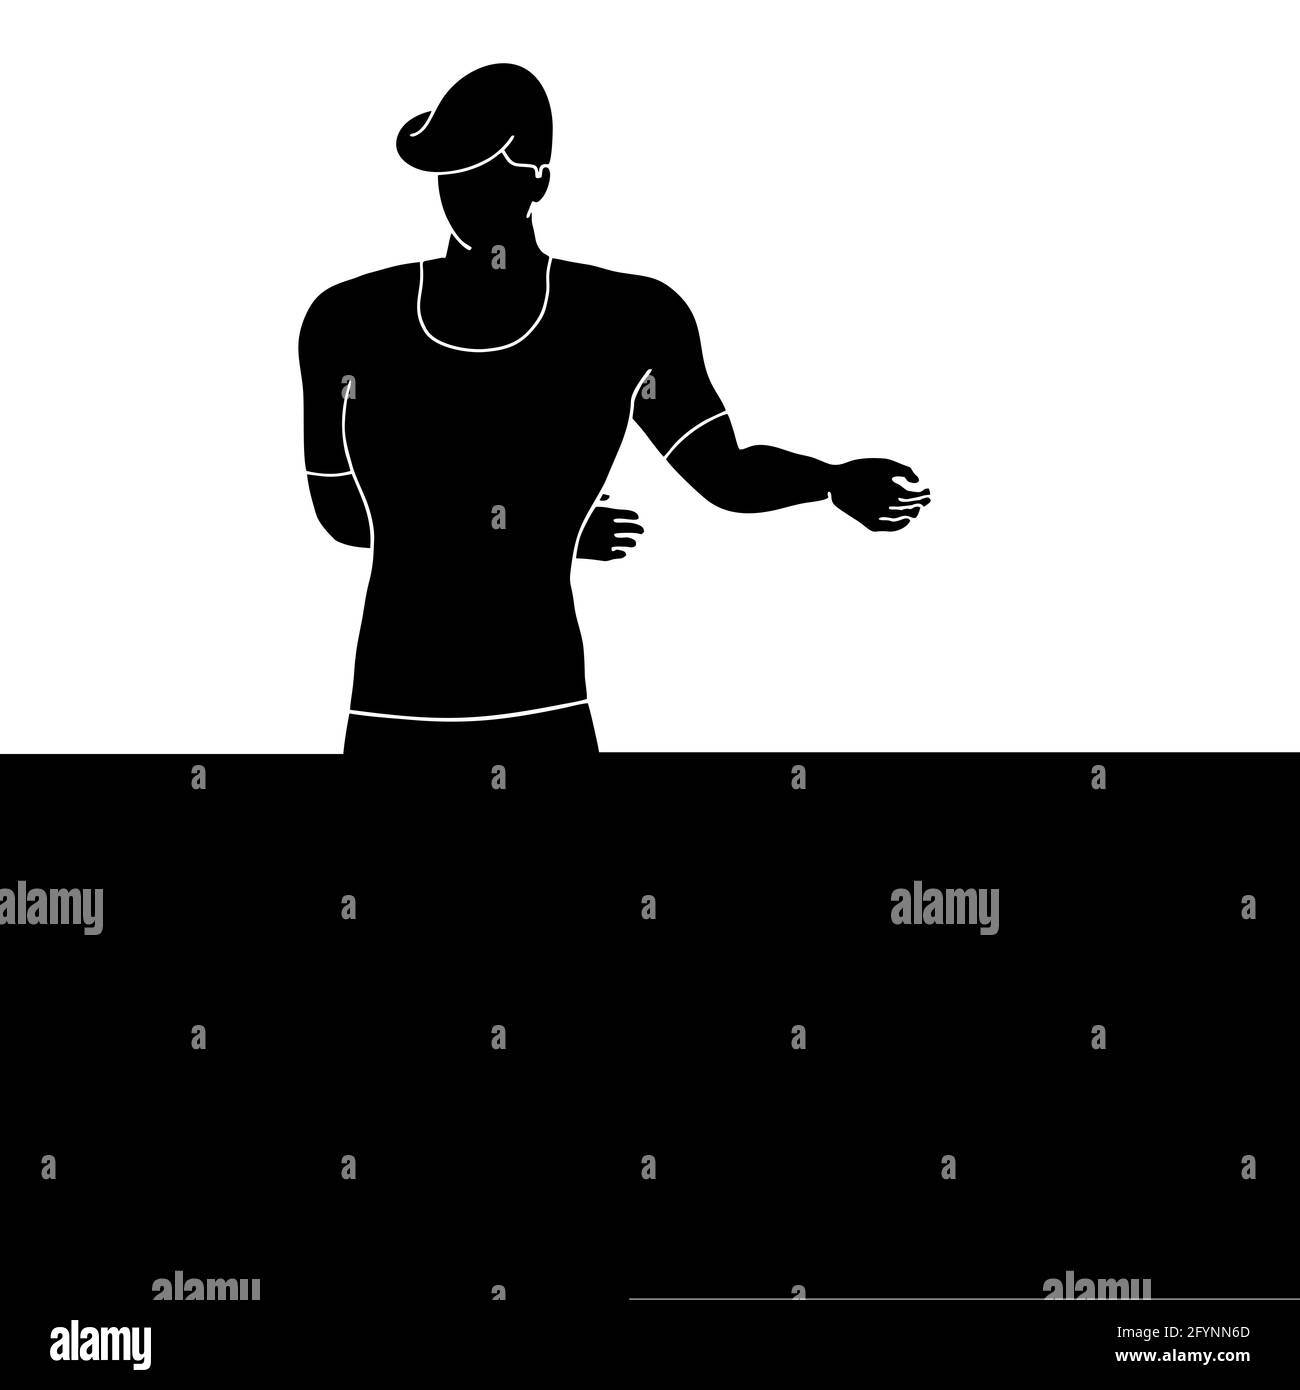 Silhouette of a cartoon man presenting something creative illustrated on a white background Stock Photo